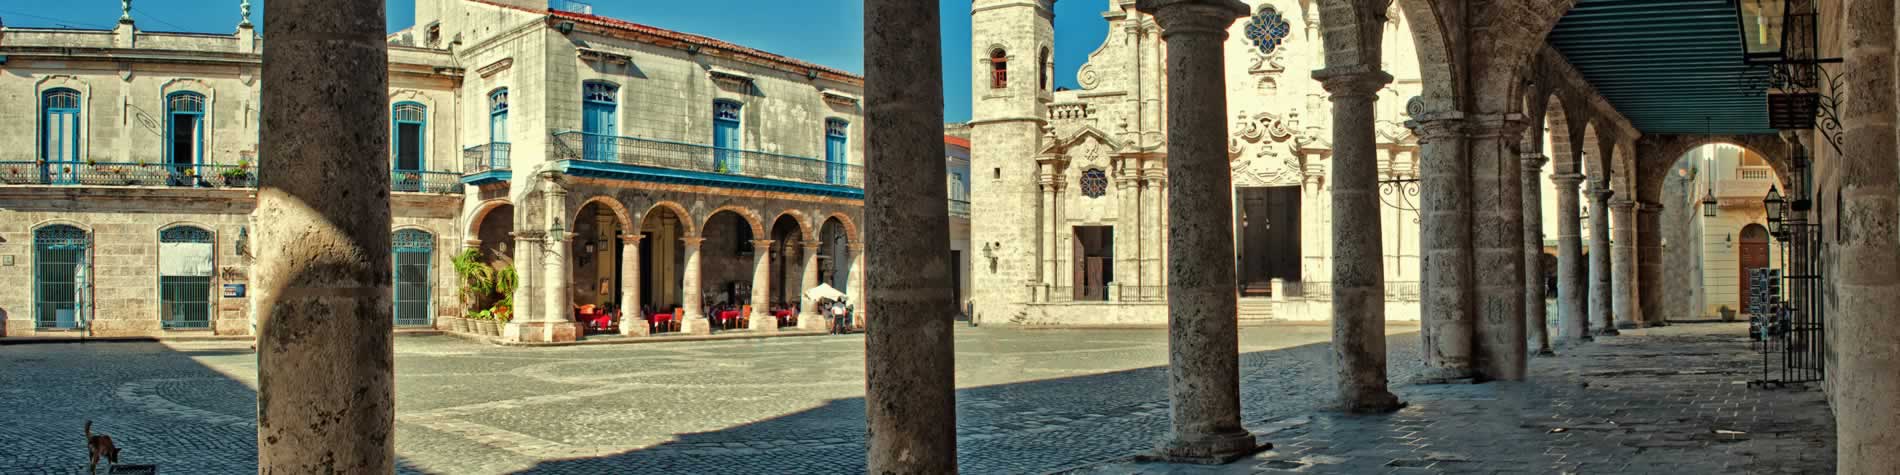 View of the old square 